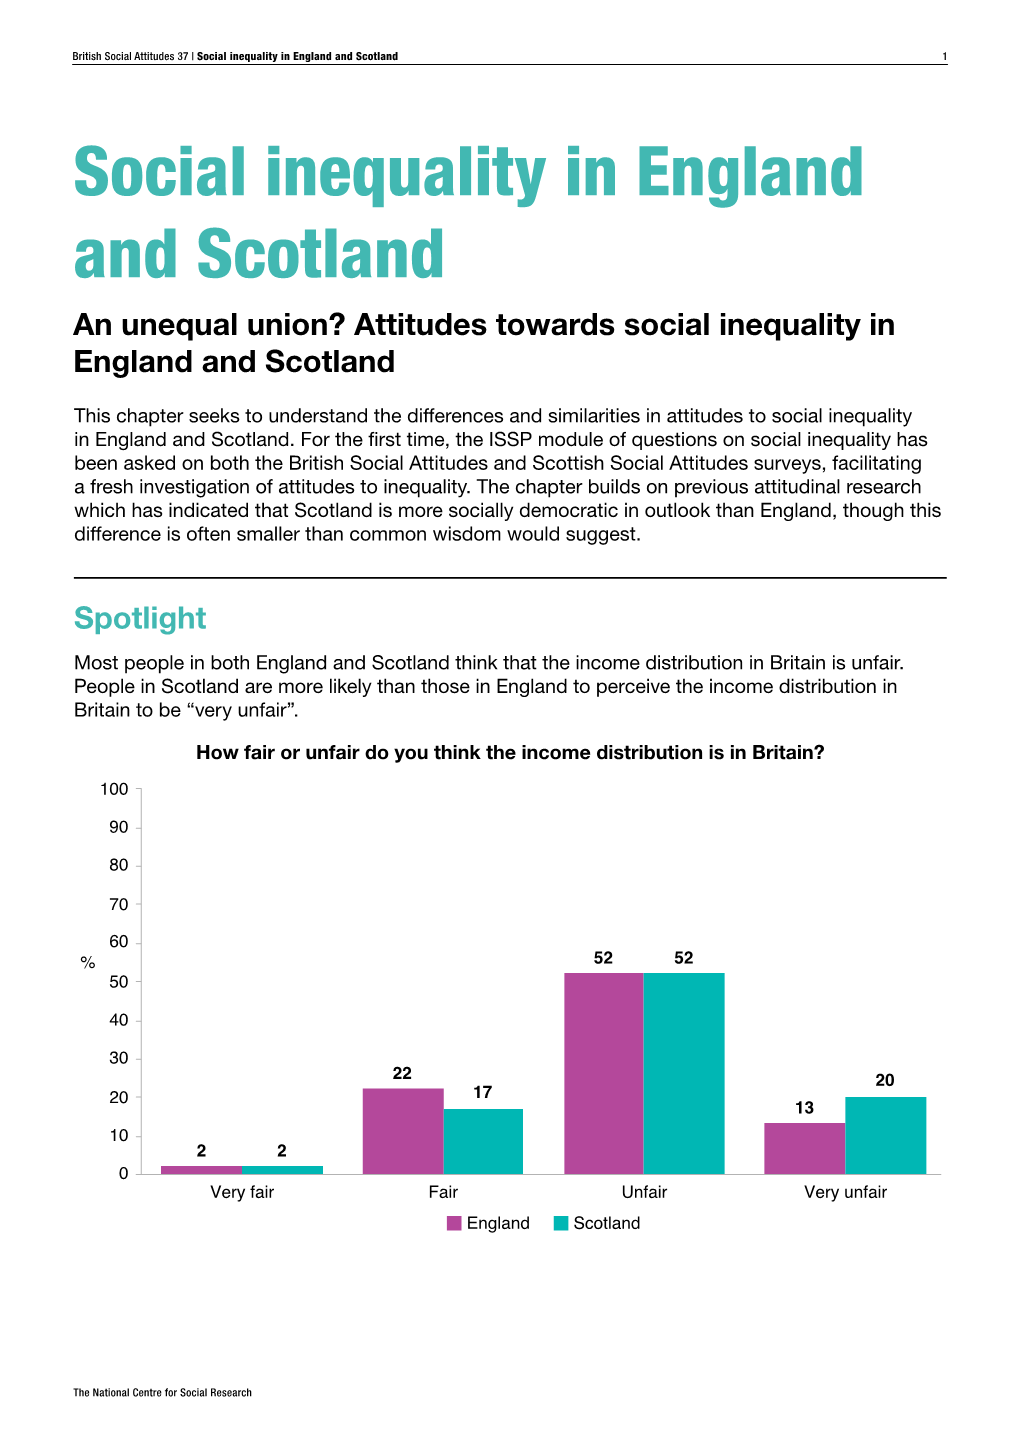 Attitudes Towards Social Inequality in England and Scotland